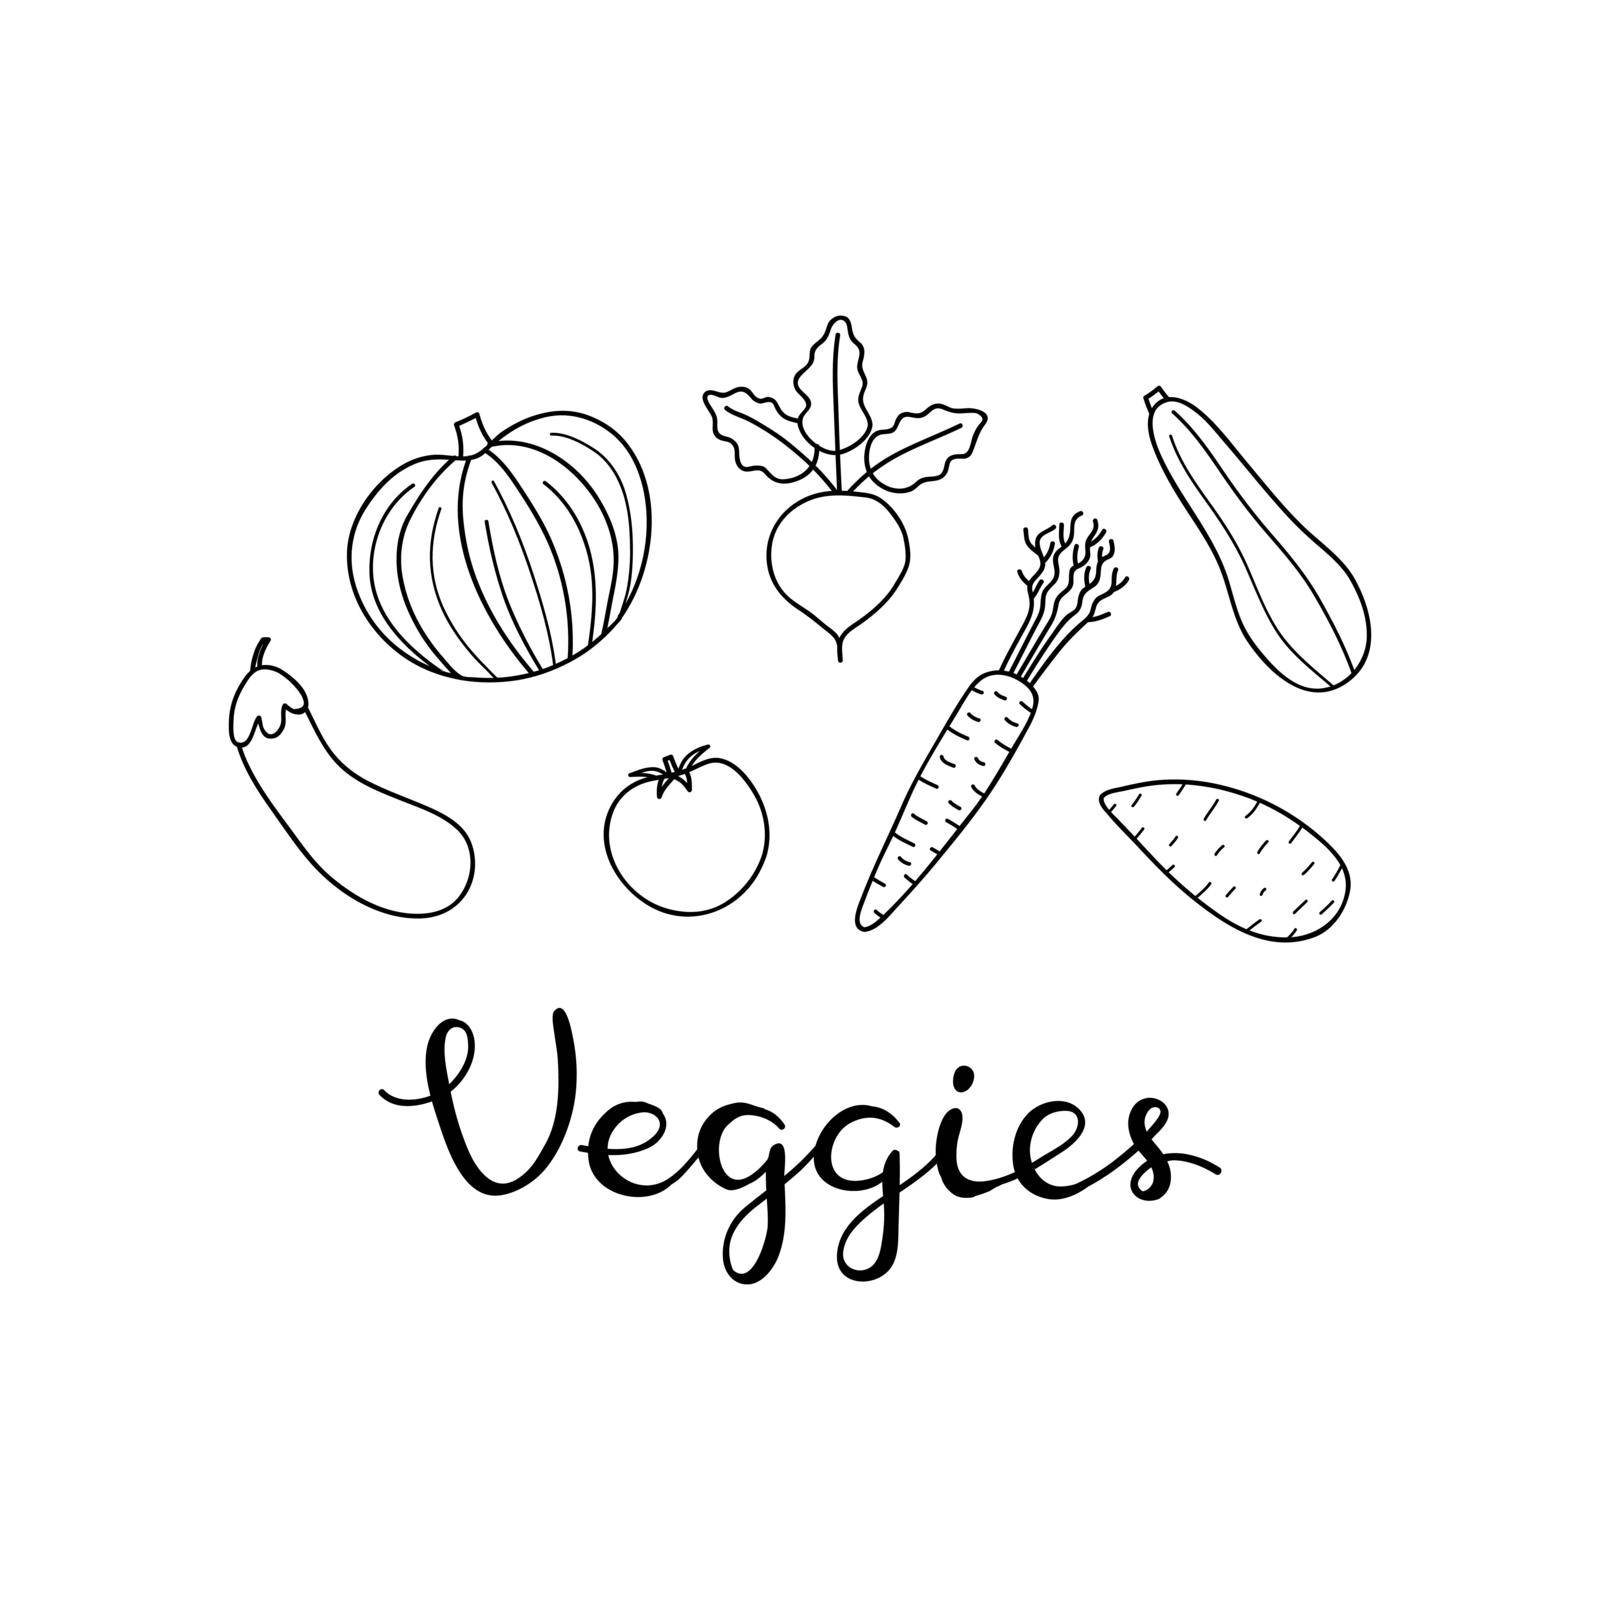 Composition with hand drawn outline veggies and lettering on white background.